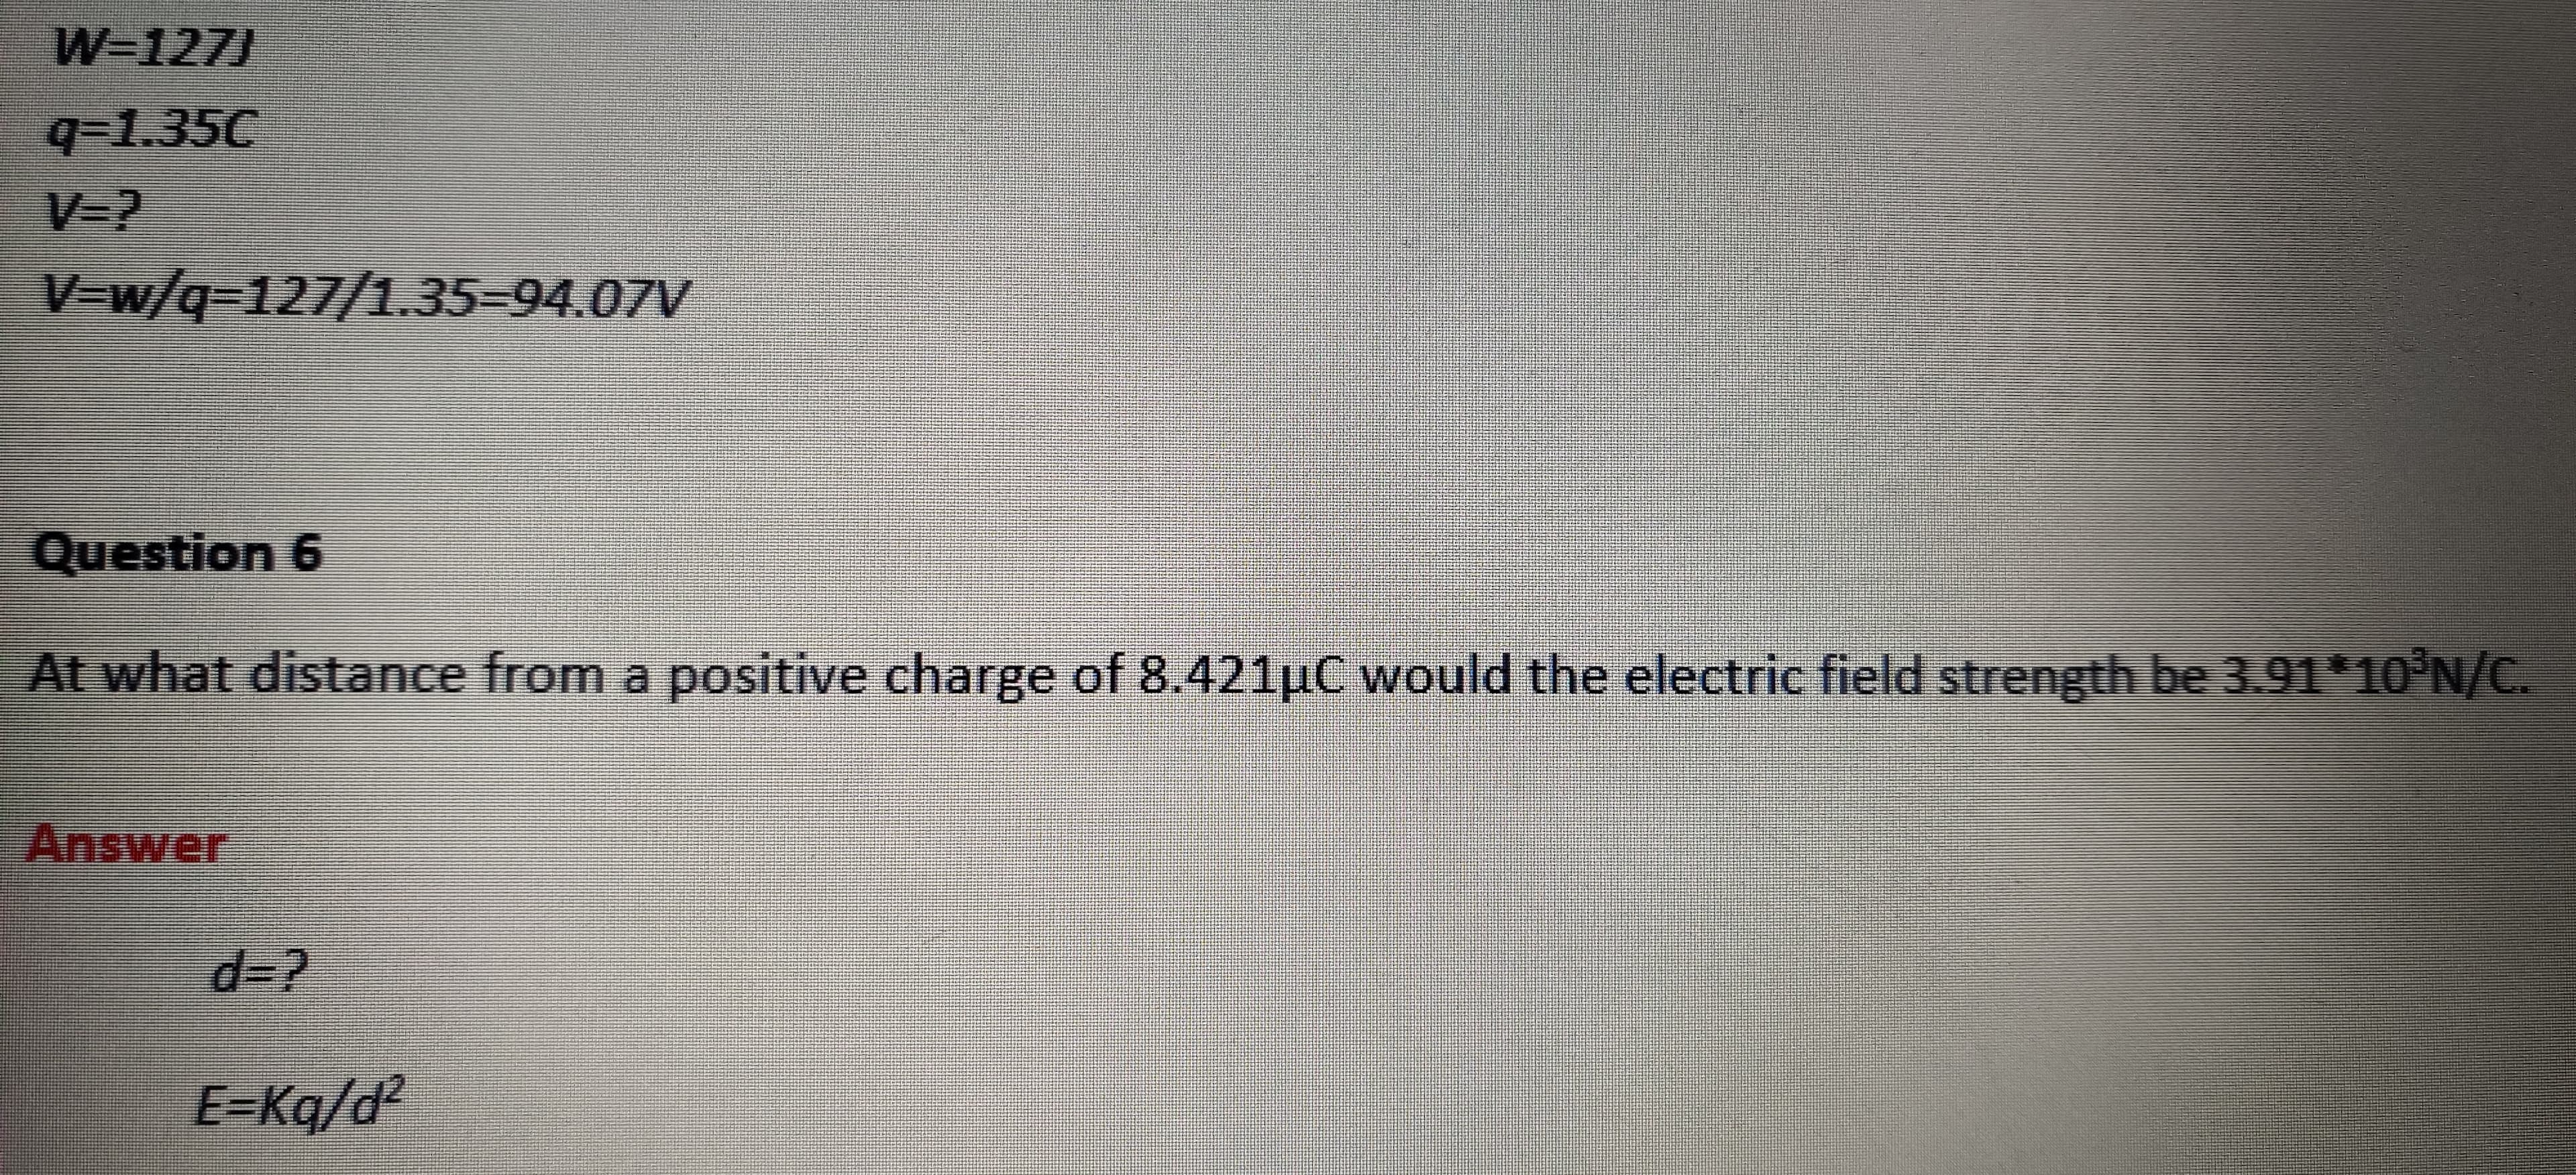 W=127J
q-1.35C
V=?
V=w/q3127/1.35-94.07V
Question 6
At what distance from a positive charge of 8.421µC would the electric field strength be 3.91*10°N/C.
Answer
d%3?
E=Kq/d?
